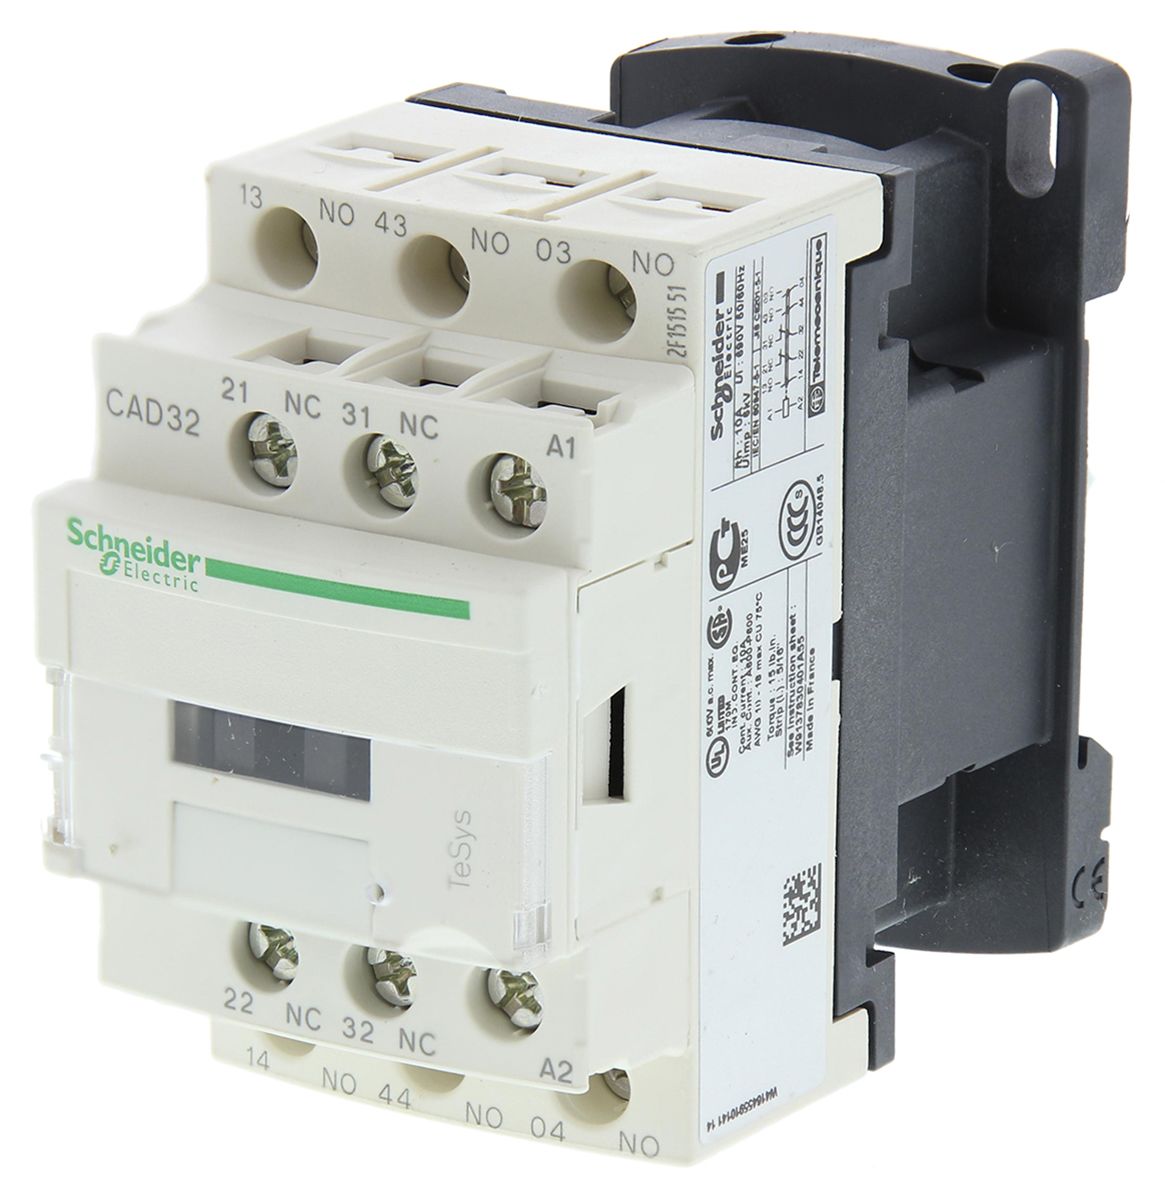 Schneider Electric Control Relay - 2NO + 2NC, 10 A Contact Rating, TeSys